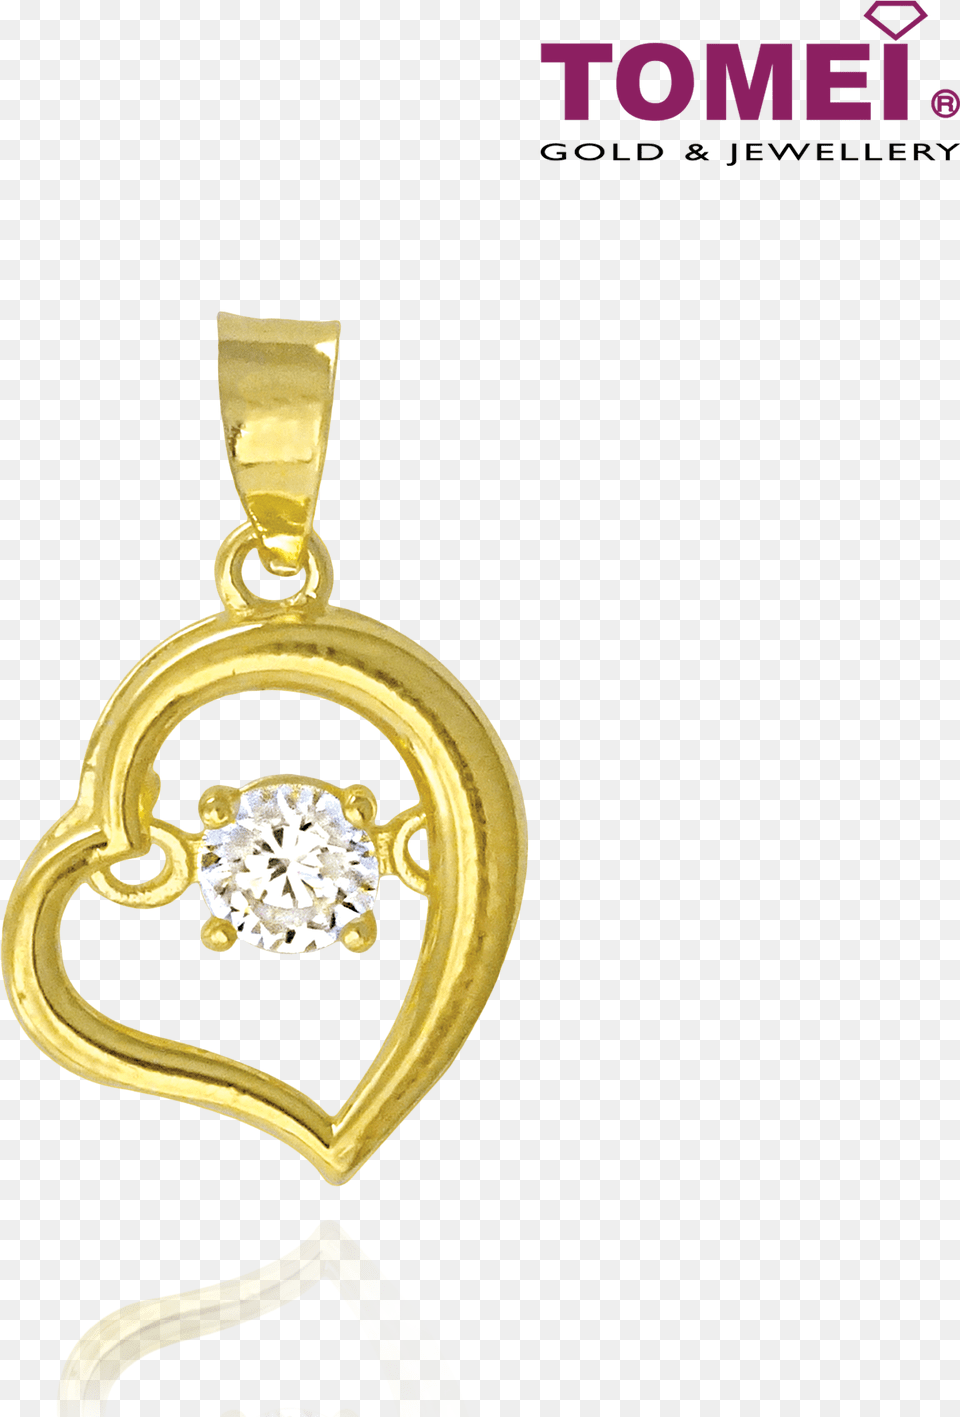 Tomei 916 Yellow Gold Quotmy Heart Beats For Youquot Cubic, Accessories, Earring, Jewelry, Pendant Png Image